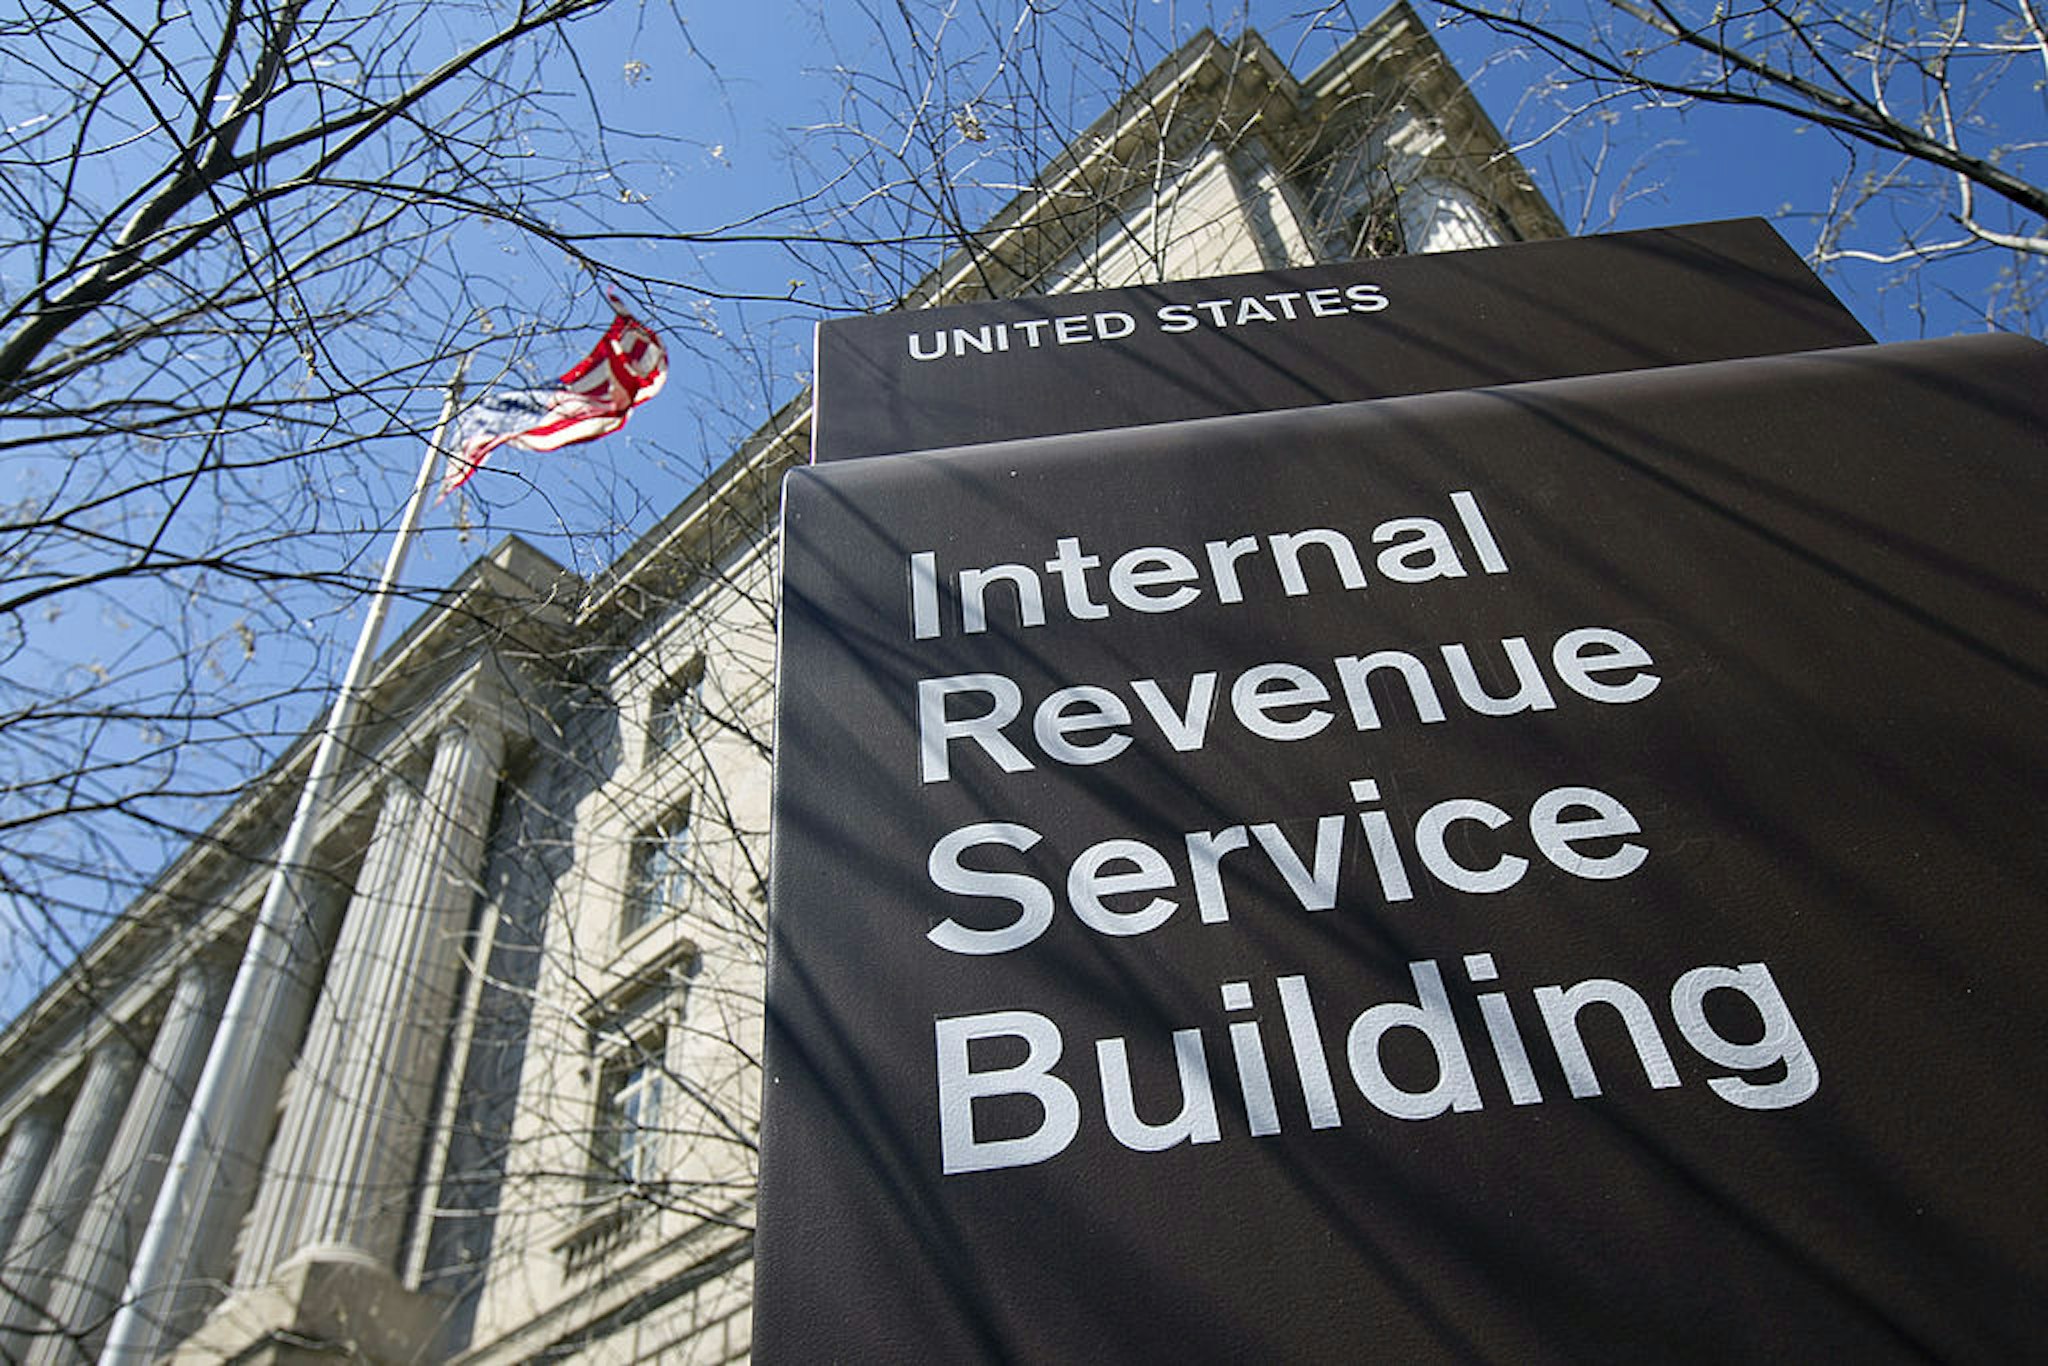 The Internal Revenue Service (IRS) building stands in Washington, D.C., U.S., on Wednesday, April 6, 2011. The IRS would have to suspend tax audits, the Small Business Administration's processing of loan applications would be halted and National Parks would close if the federal government is forced into a partial shutdown because of the budget impasse in Congress.